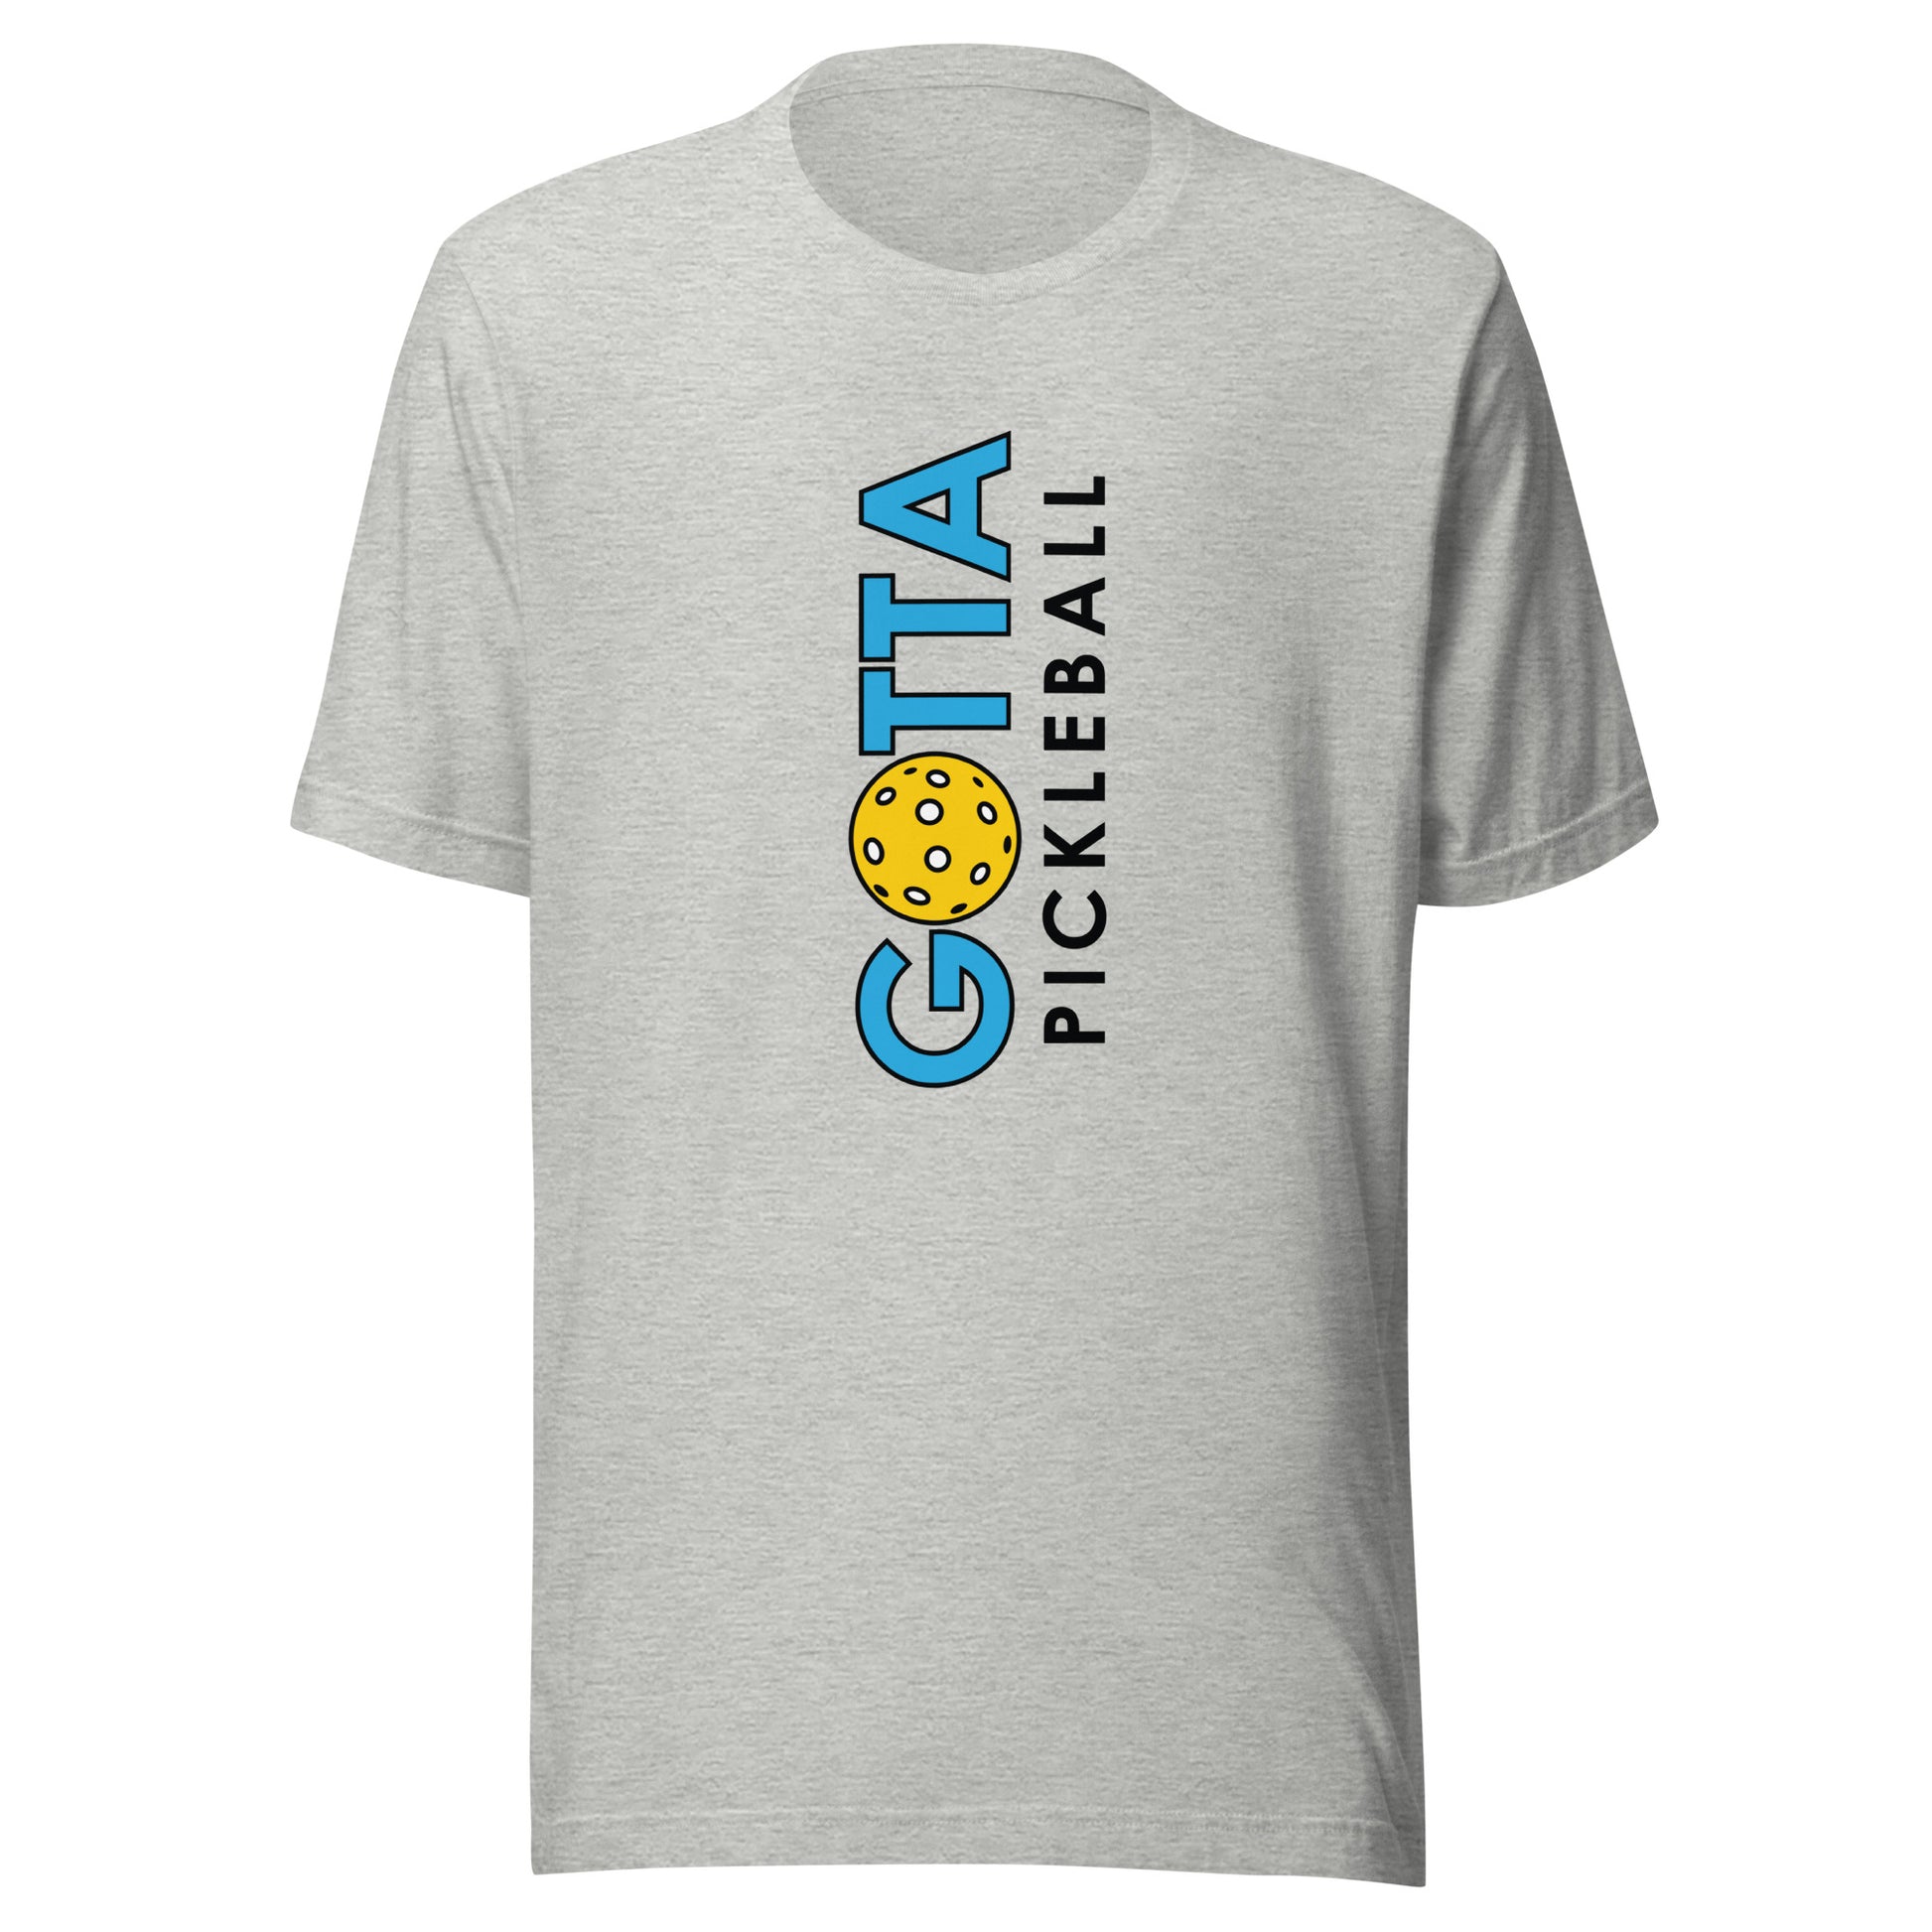 t-shirt sports grey with Gotta Pickleball vertical on front of shirt in blue and blaick